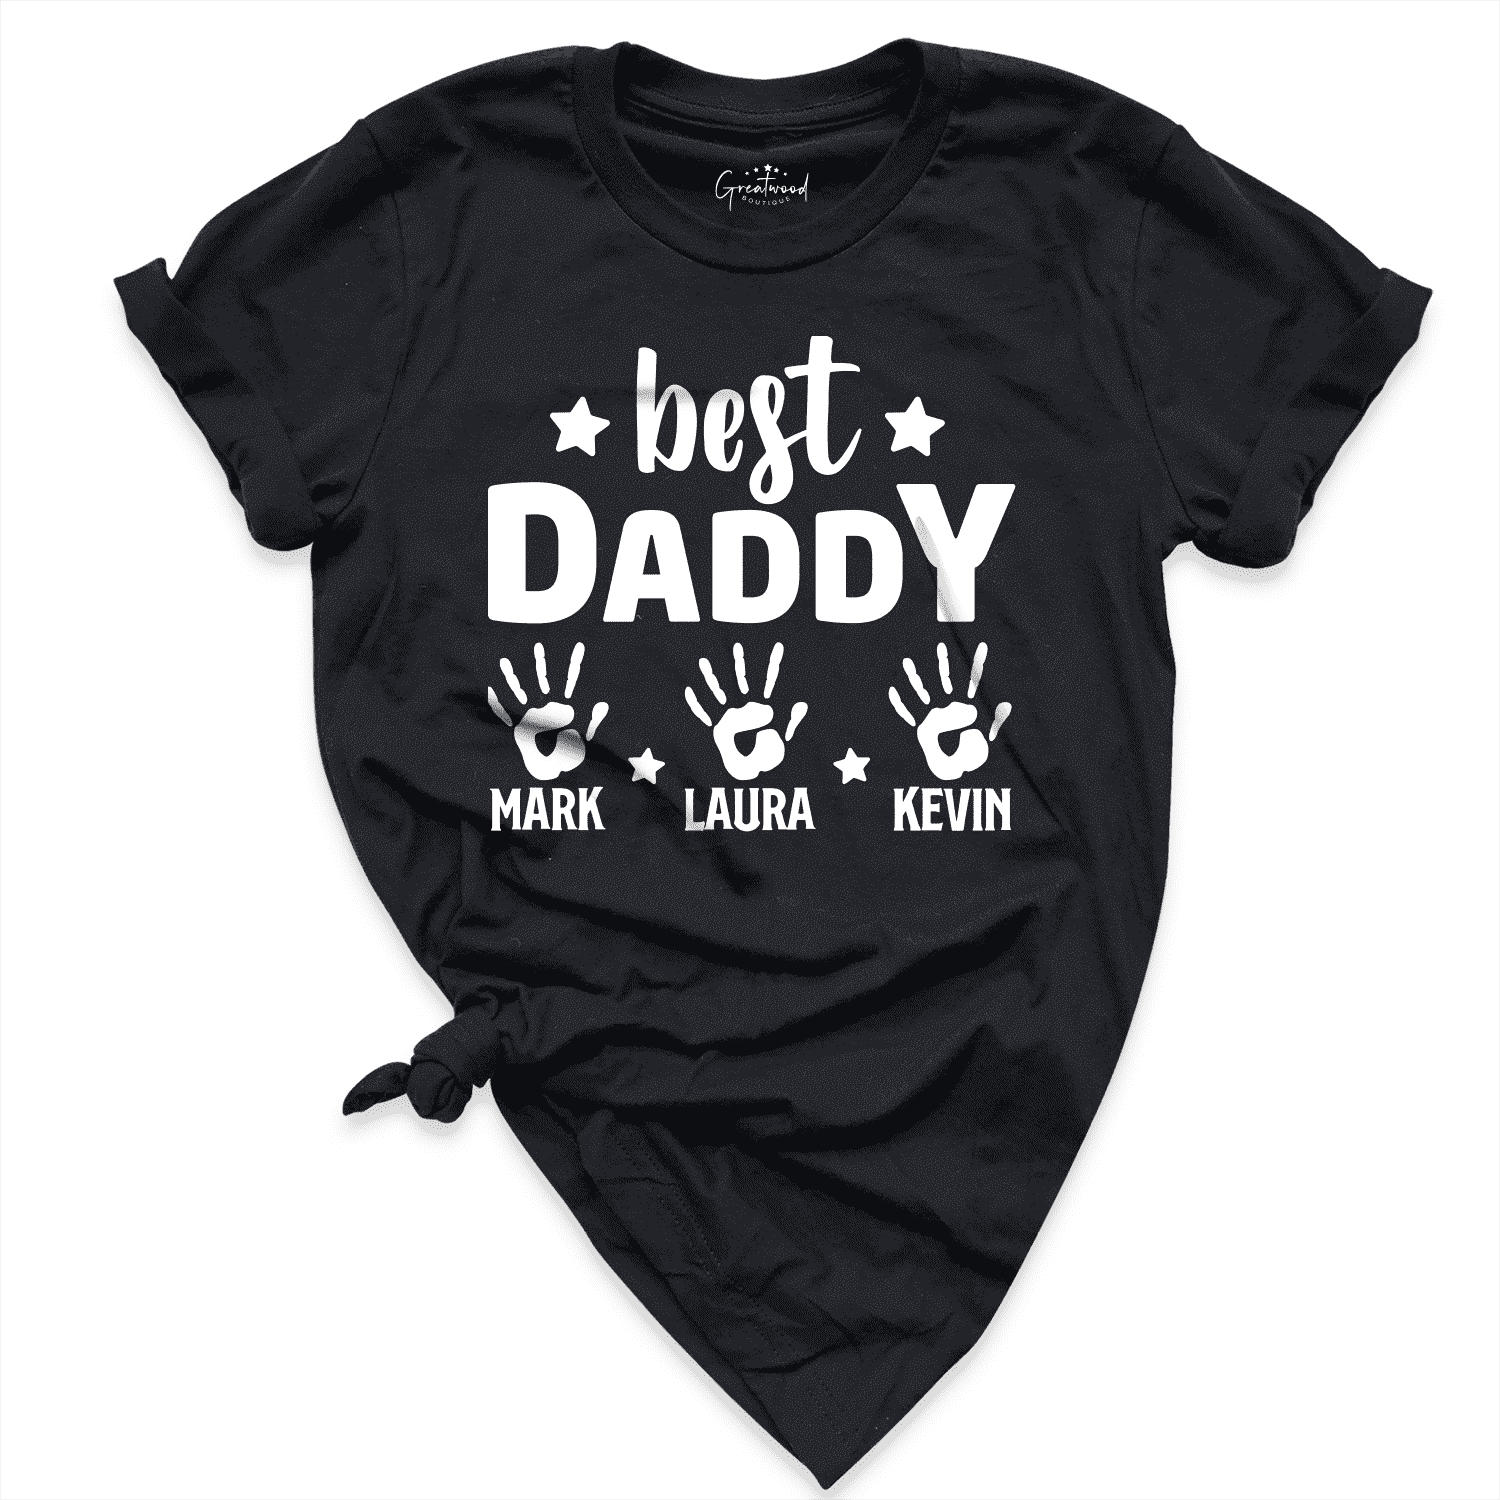 Best Daddy Custom Shirt Black - Greatwood Boutique